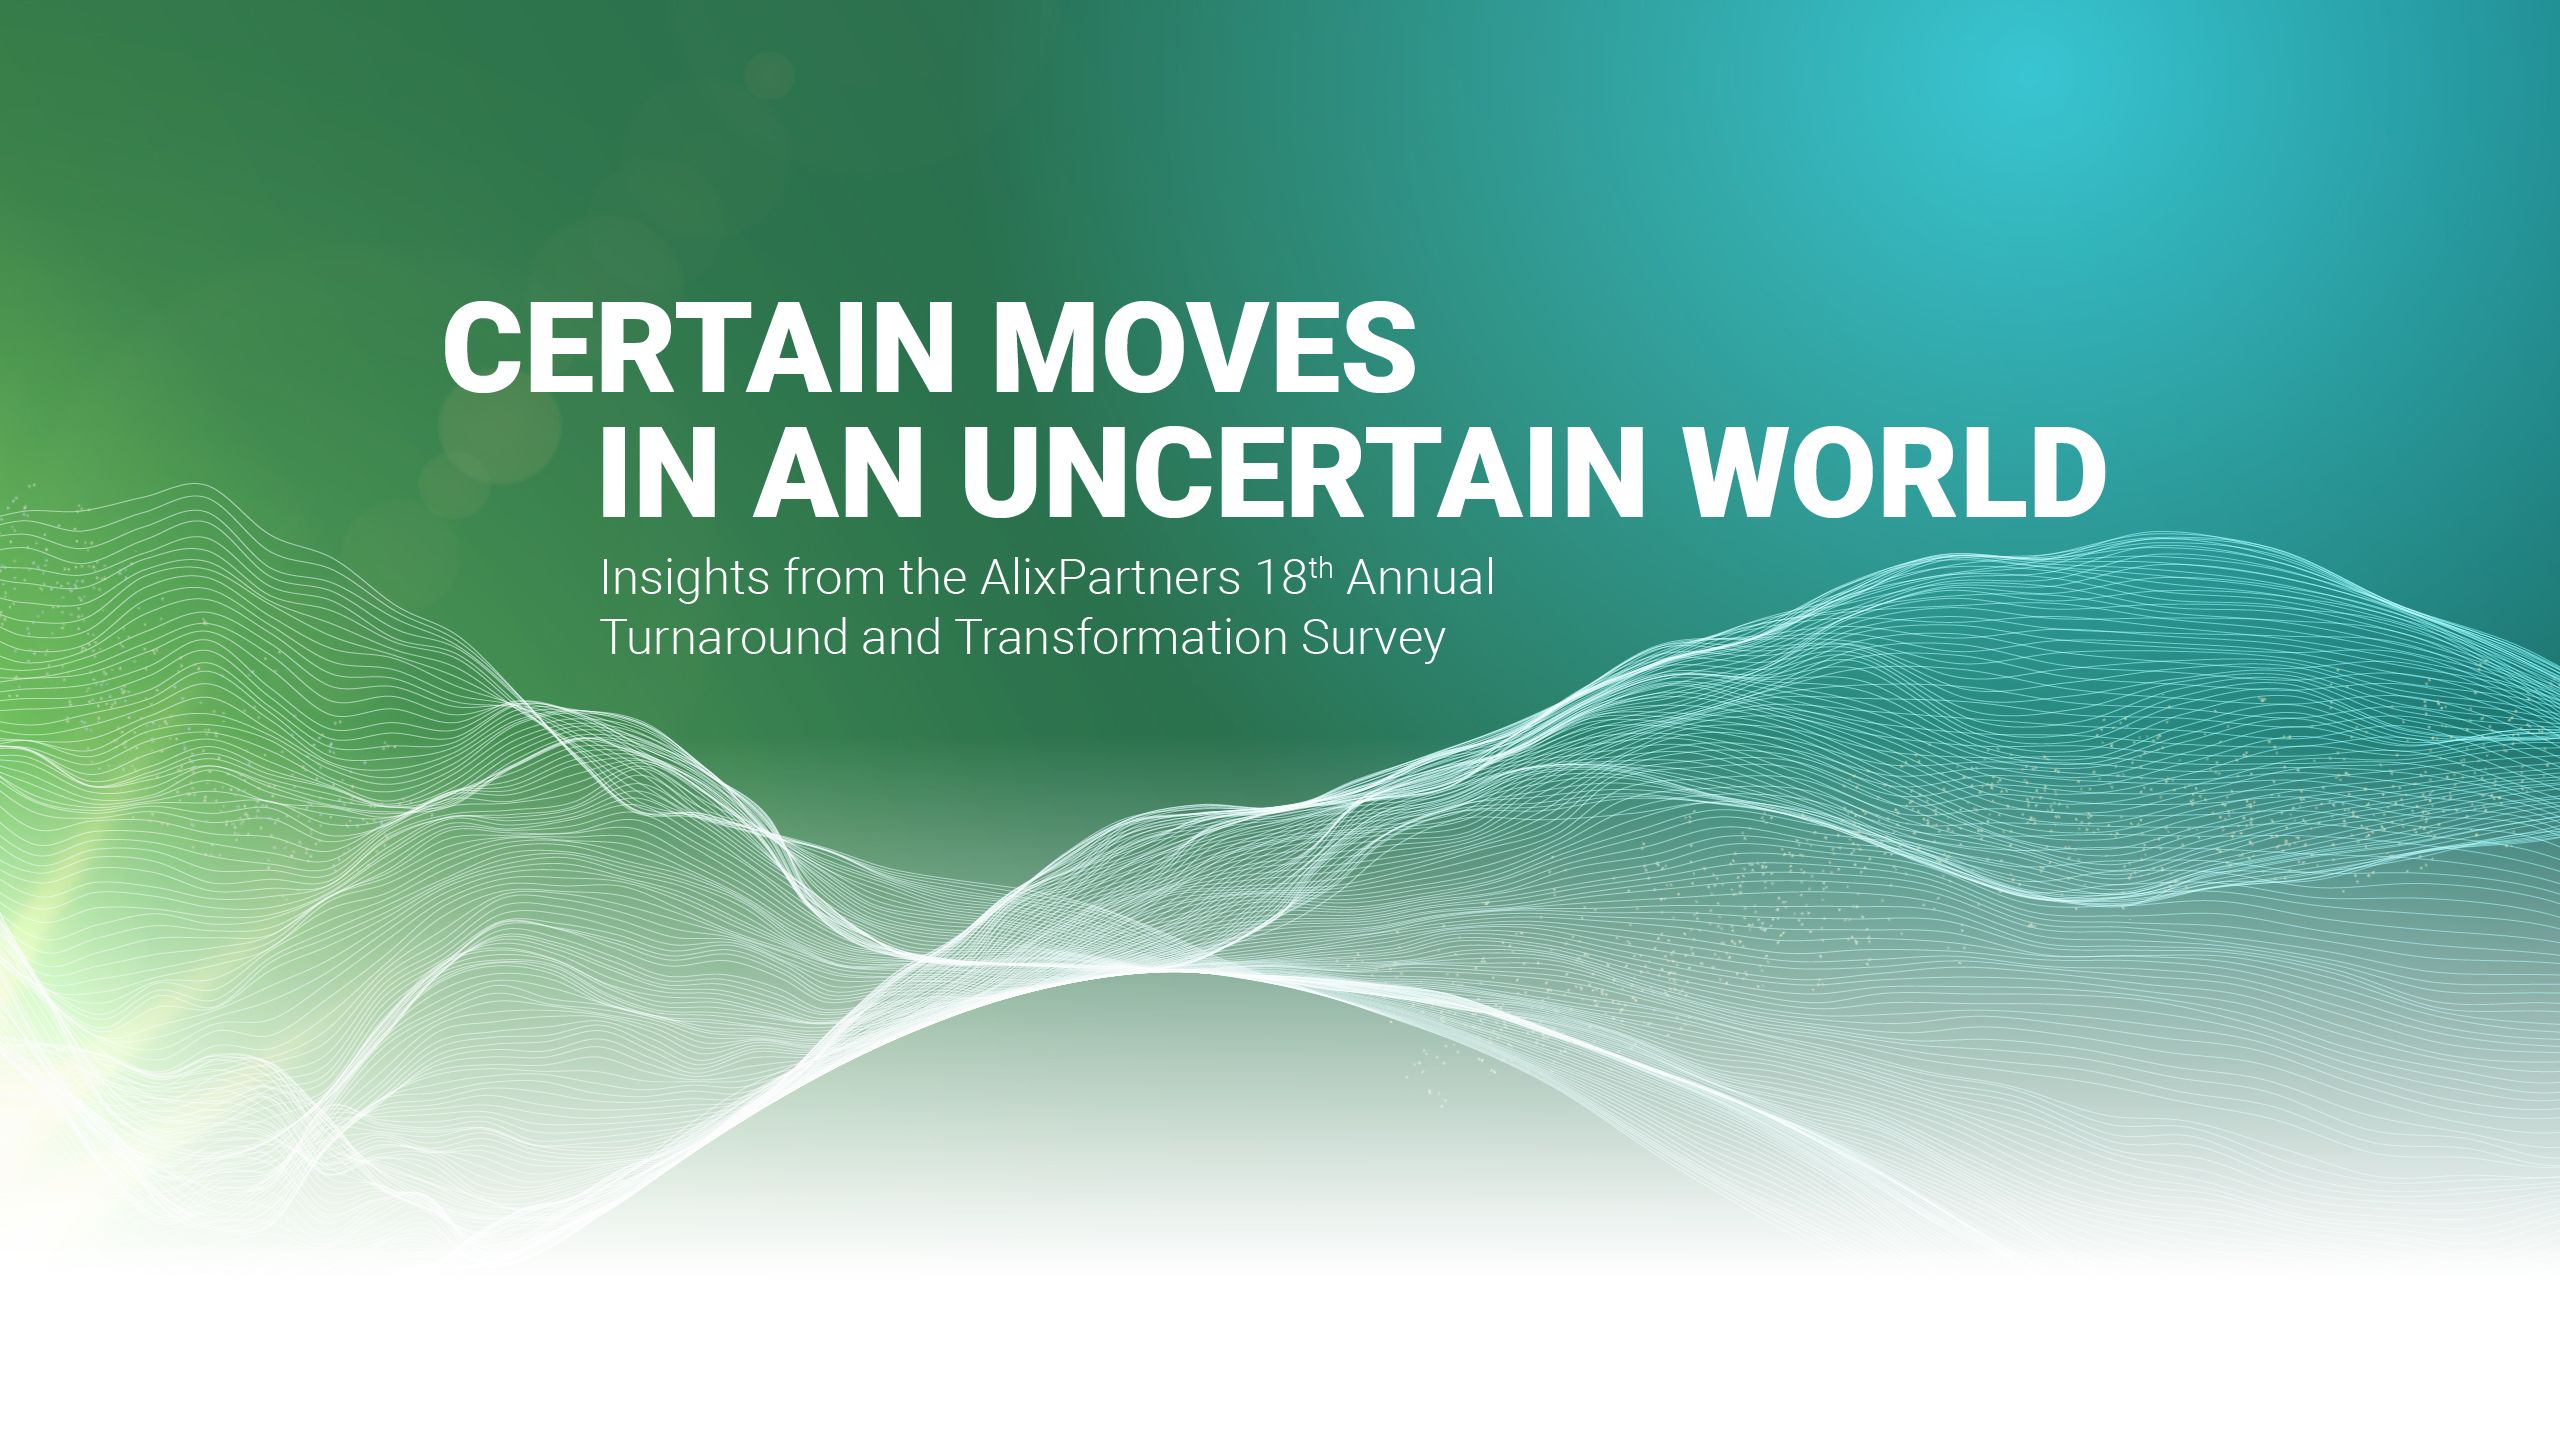 AlixPartners 18th Annual Turnaround and Transformation Survey | Certain moves in an uncertain world